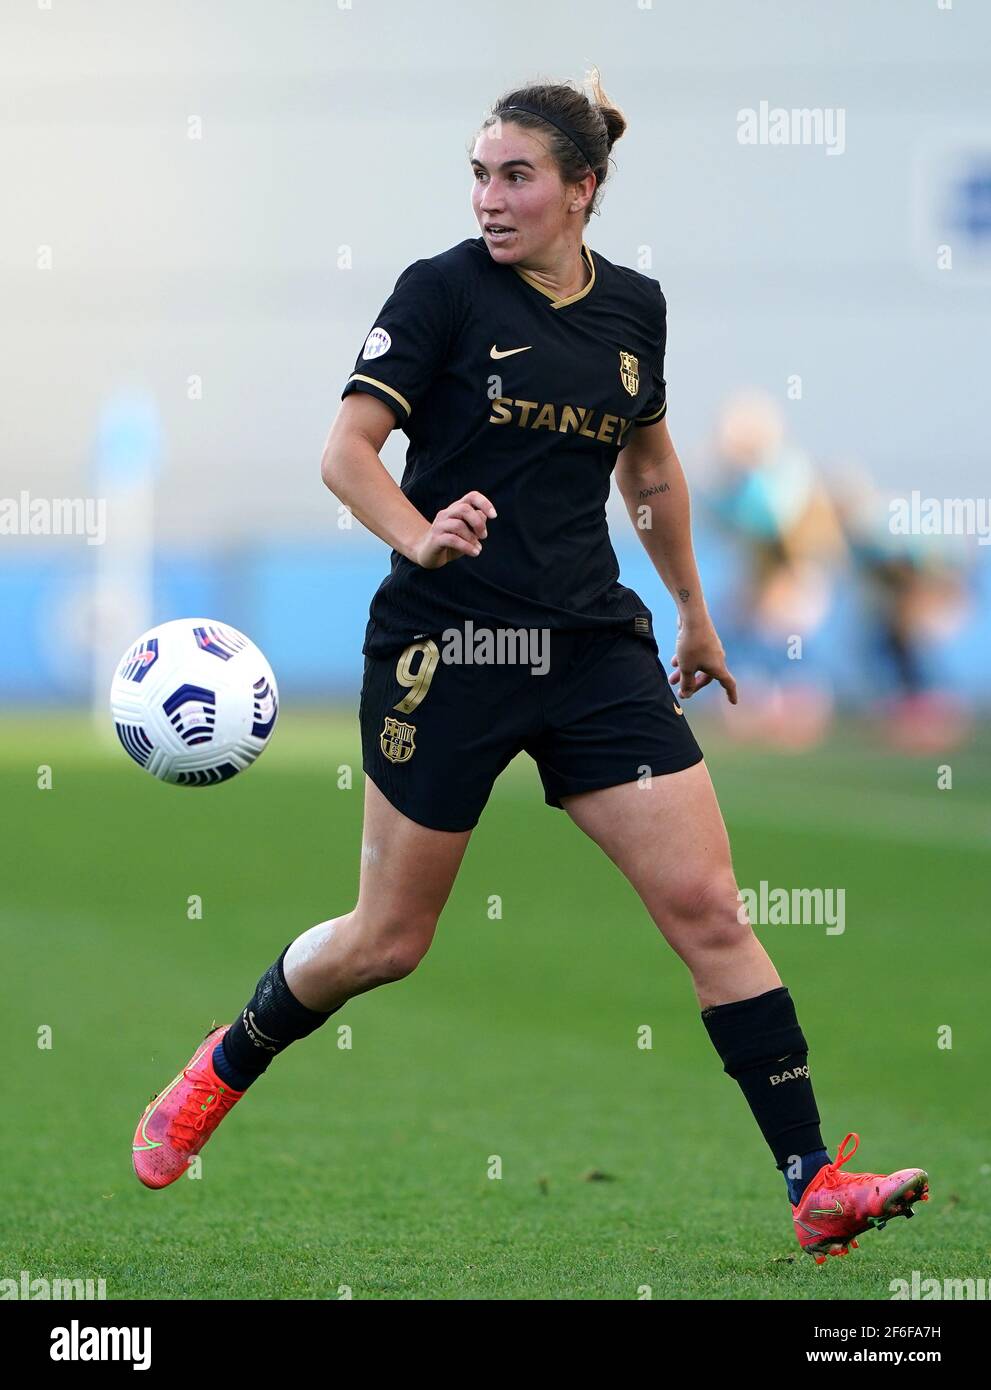 Barcelona's Mariona Caldentey during the 2021 UEFA Women's Champions League match at the Manchester City Academy Stadium, Manchester. Picture date: Wednesday March 31, 2021. Stock Photo